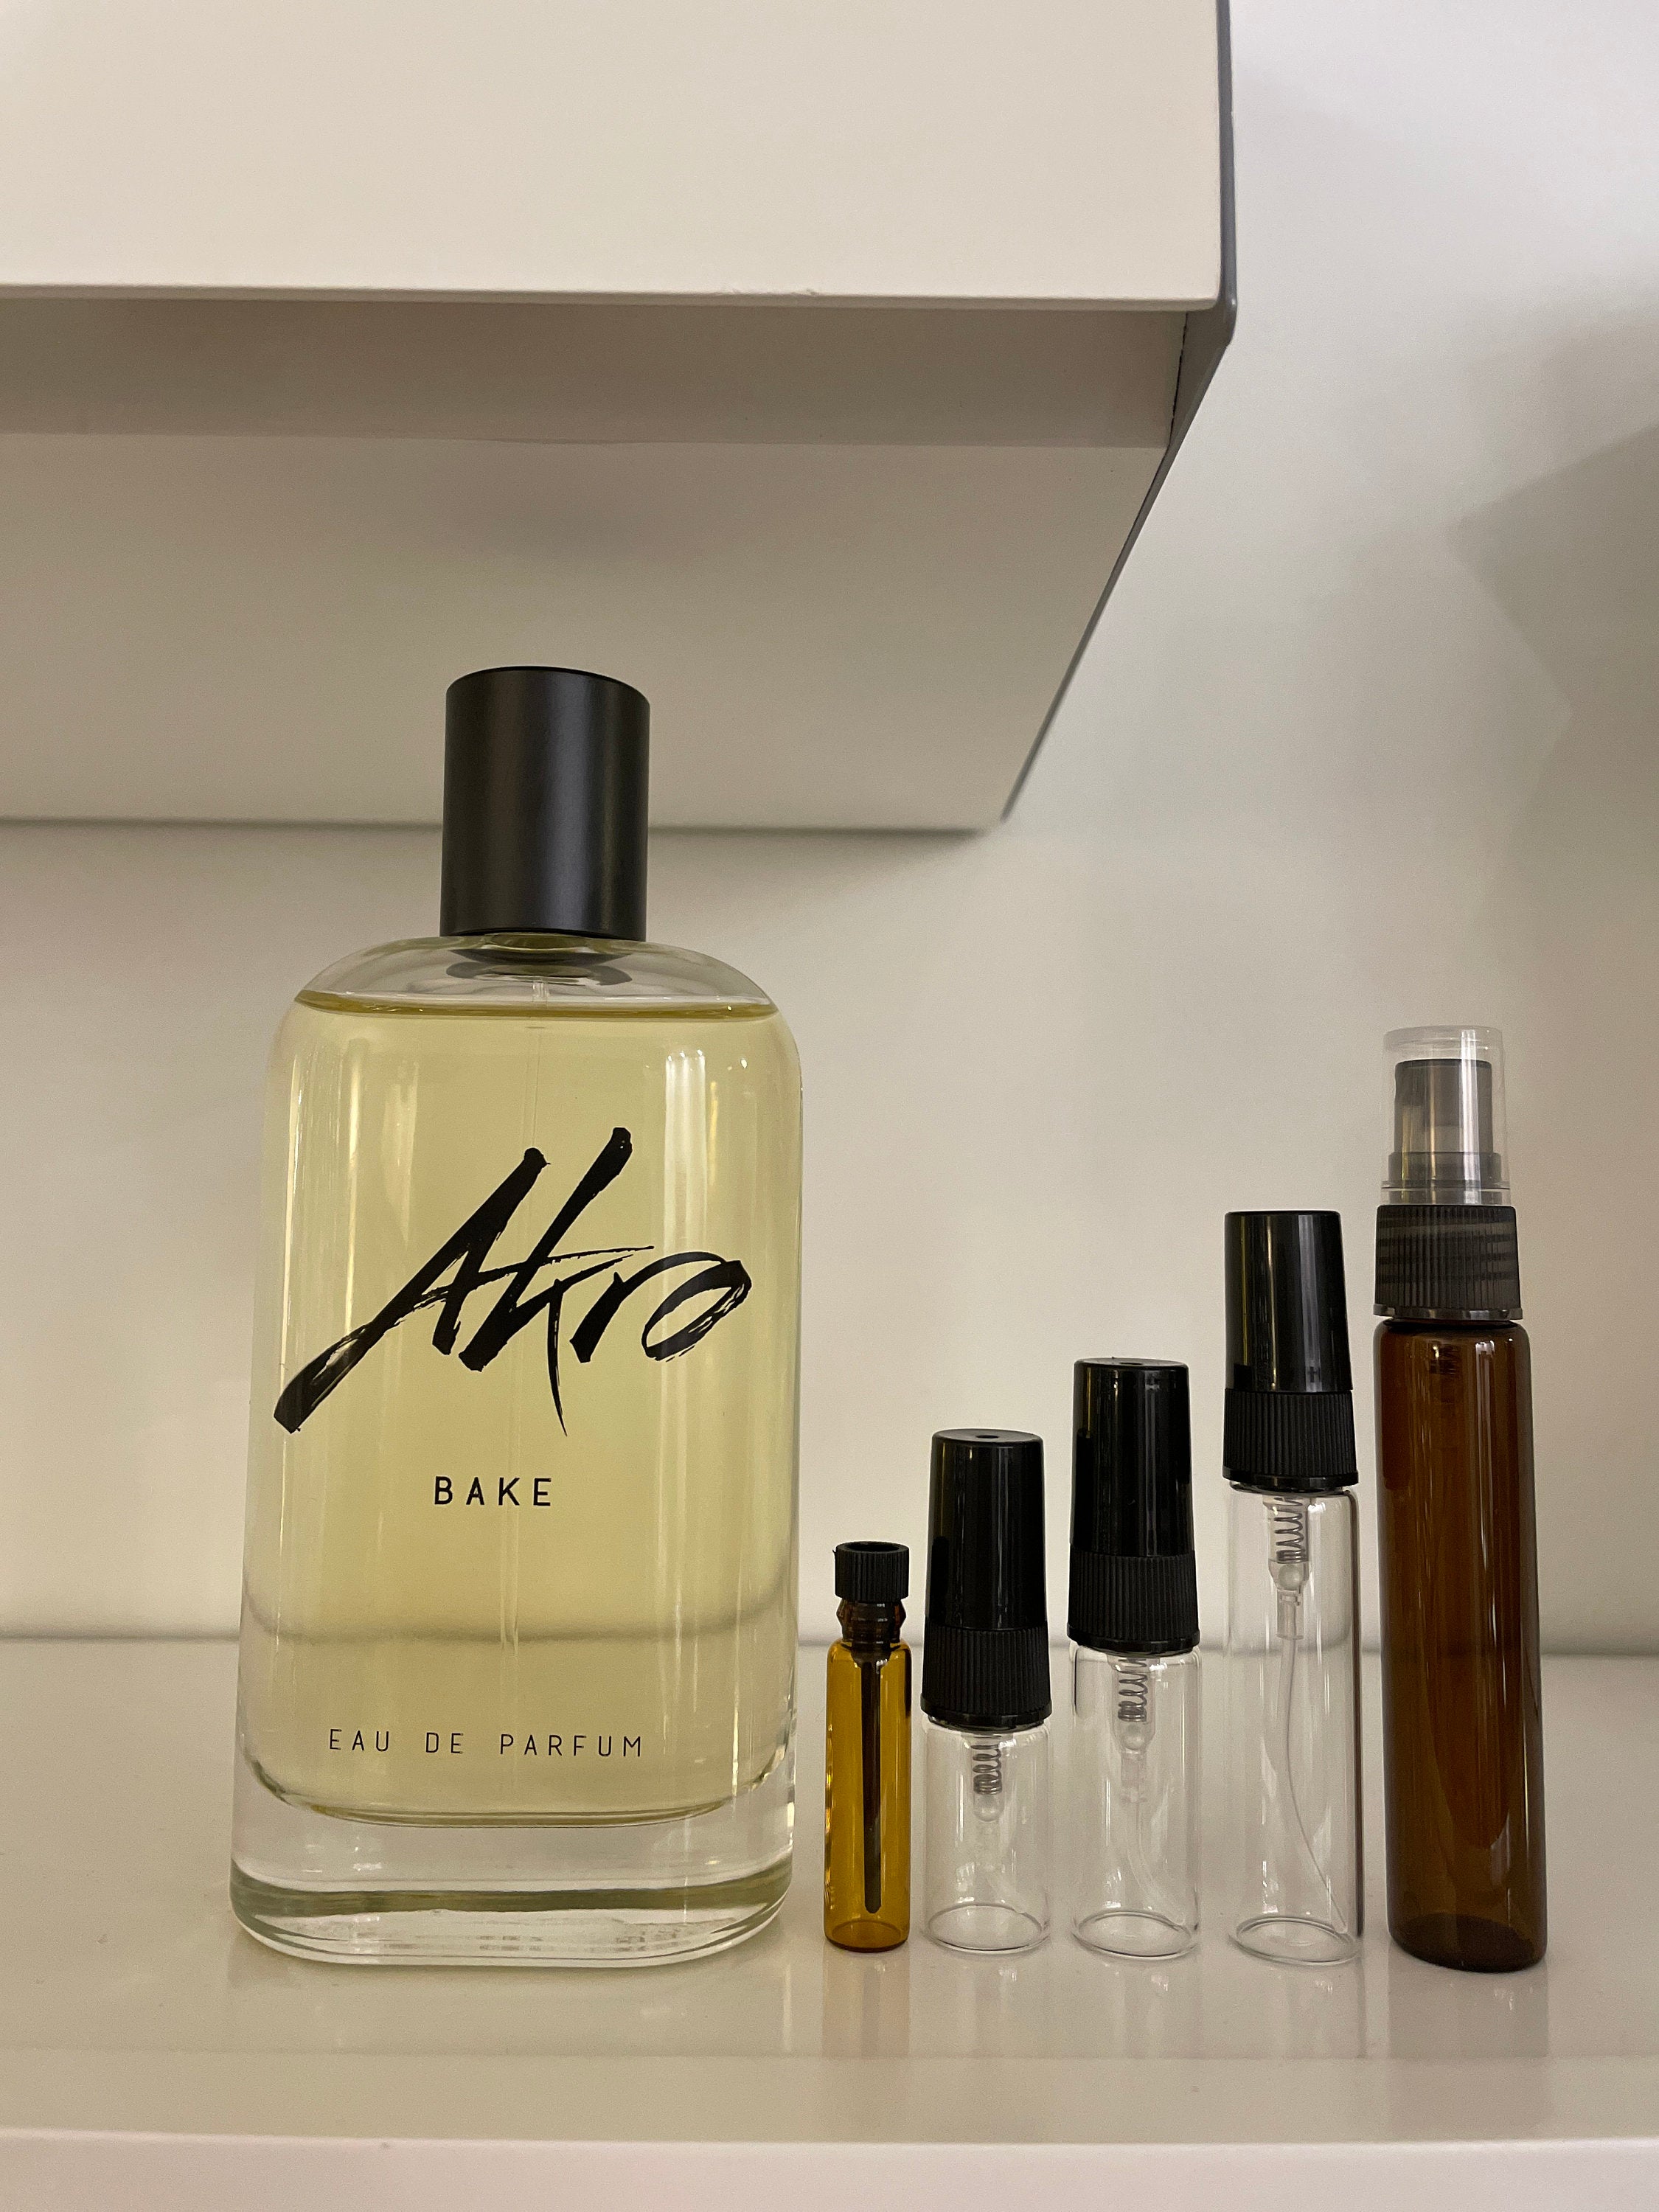 Akro | Fragrance Samples and Decants – ScentBarCA